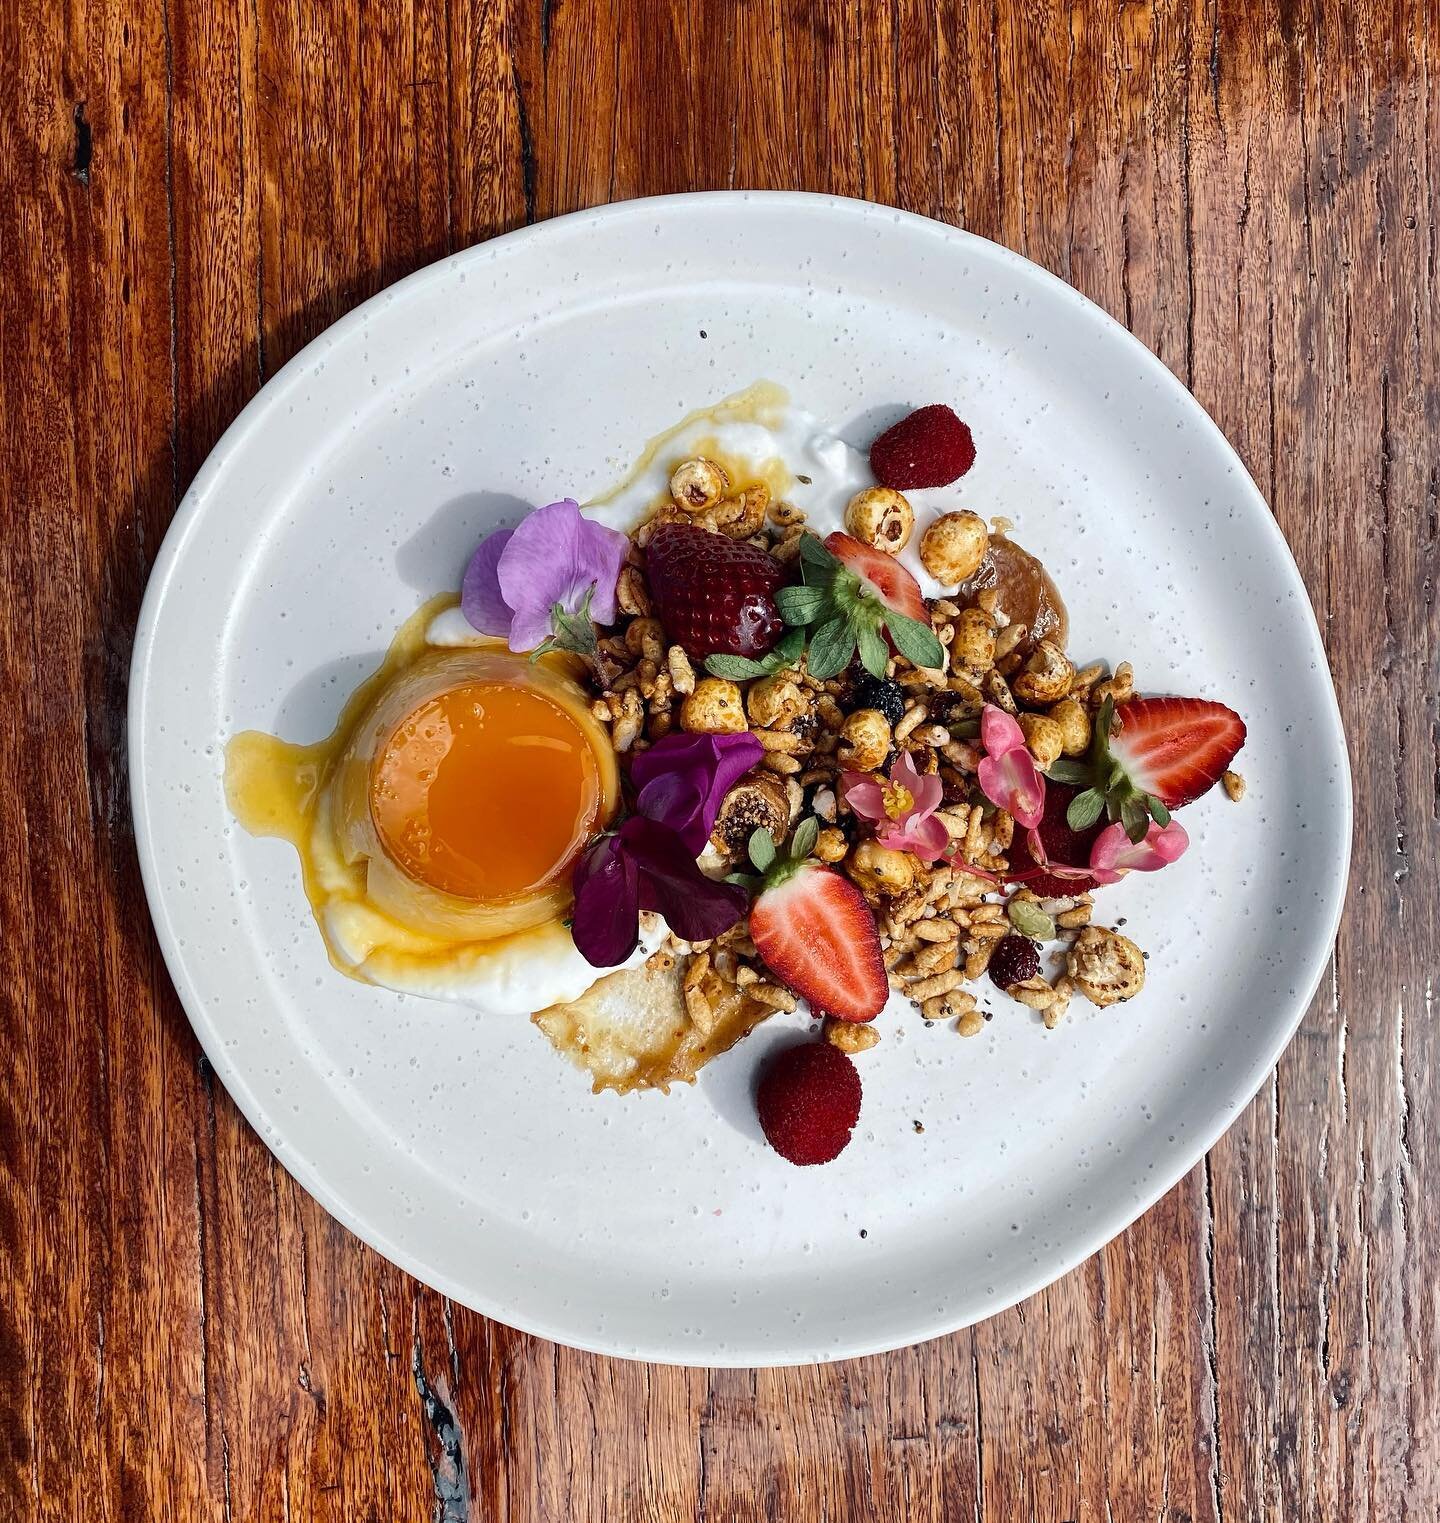 Mornings have finally started to warm up ☀️ it&rsquo;s the perfect time to enjoy our house made #glutenfree granola with a #dairyfree orange cr&egrave;me caramel, coconut yogurt, date &amp; tahini pur&eacute;e &amp; fresh seasonal fruit 

Available f